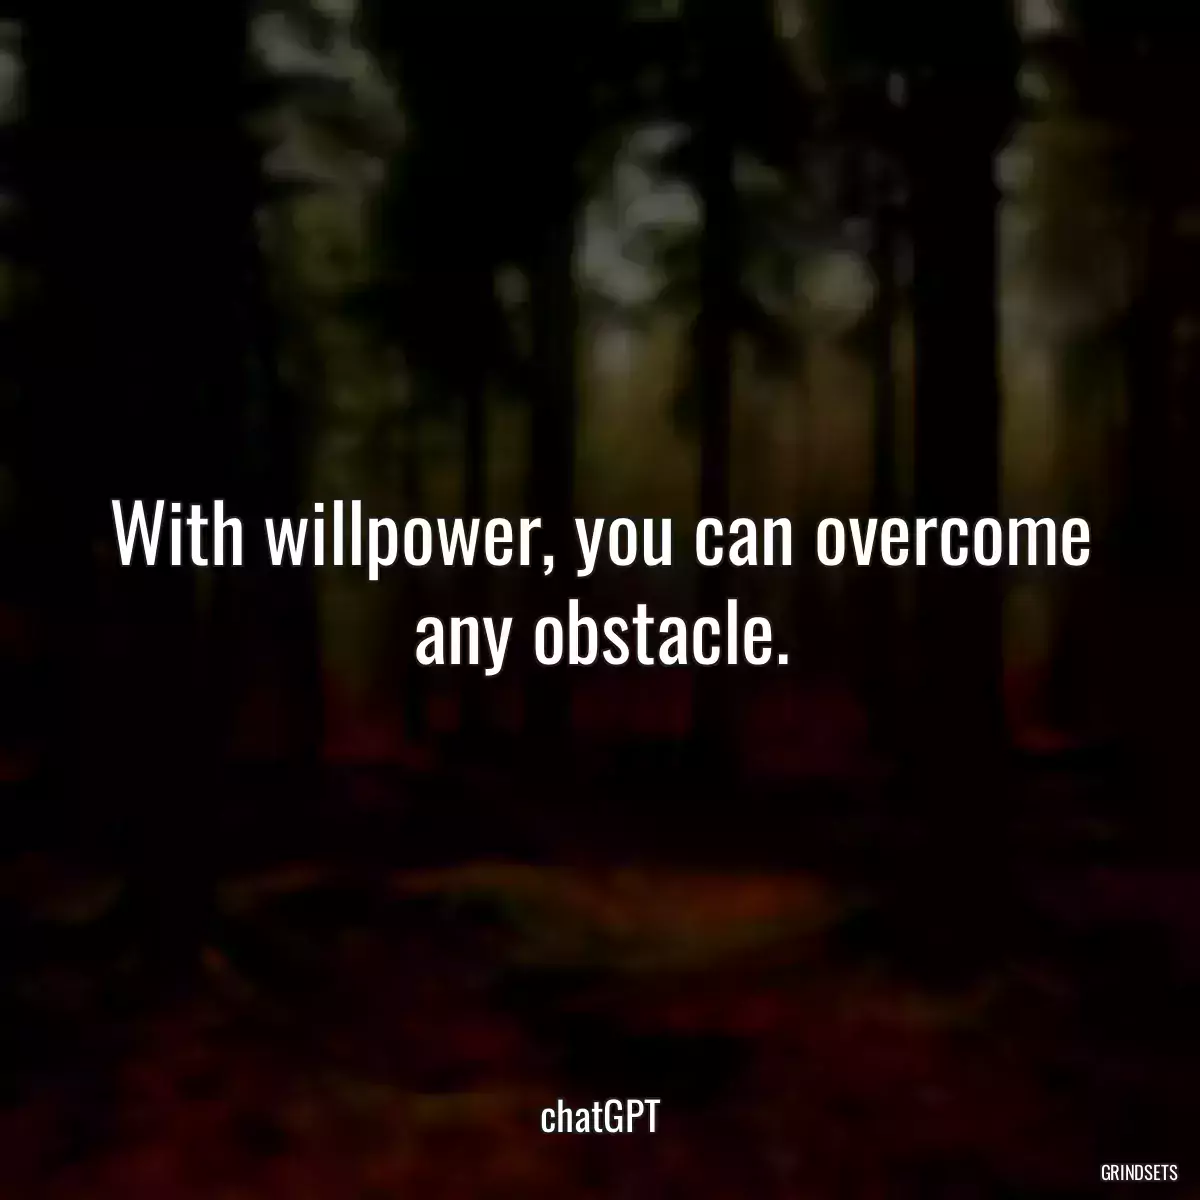 With willpower, you can overcome any obstacle.